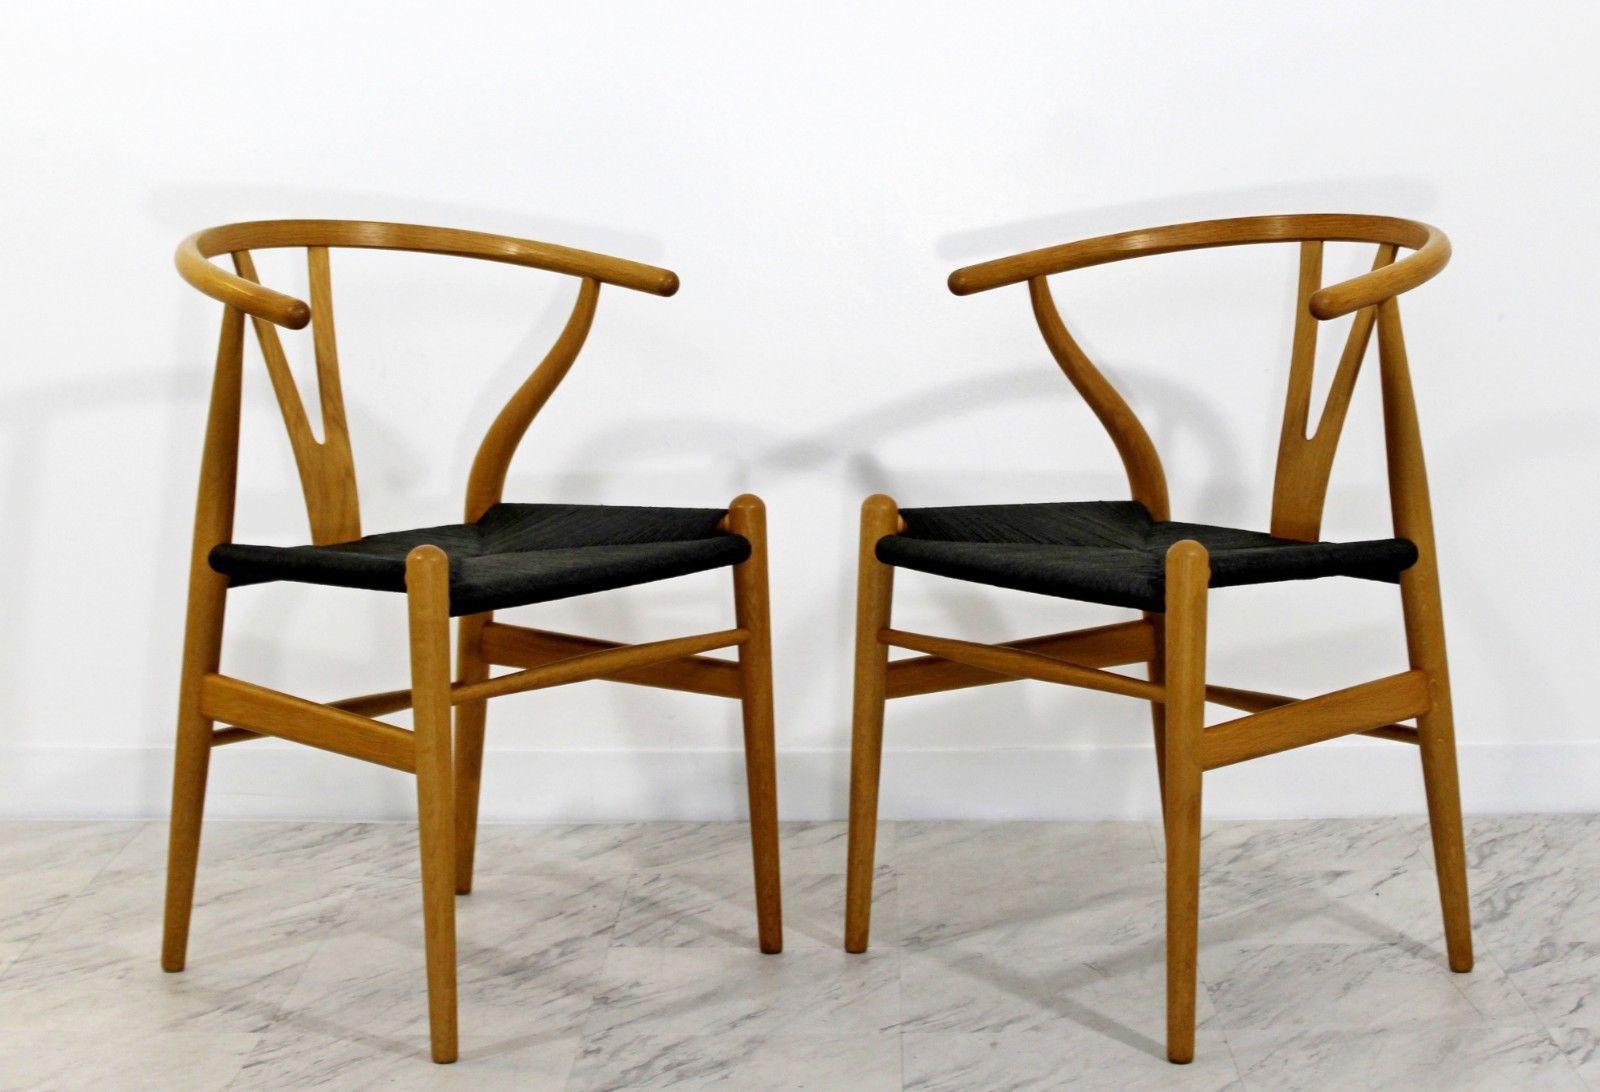 For your consideration is a marvelous, set of 2 original, wishbone CH24, dining chairs, made of curved oak and black rush or cord, by Hans Wegner for Carl Hansen, made in Denmark these are the patented newer reproduction. In excellent condition. The